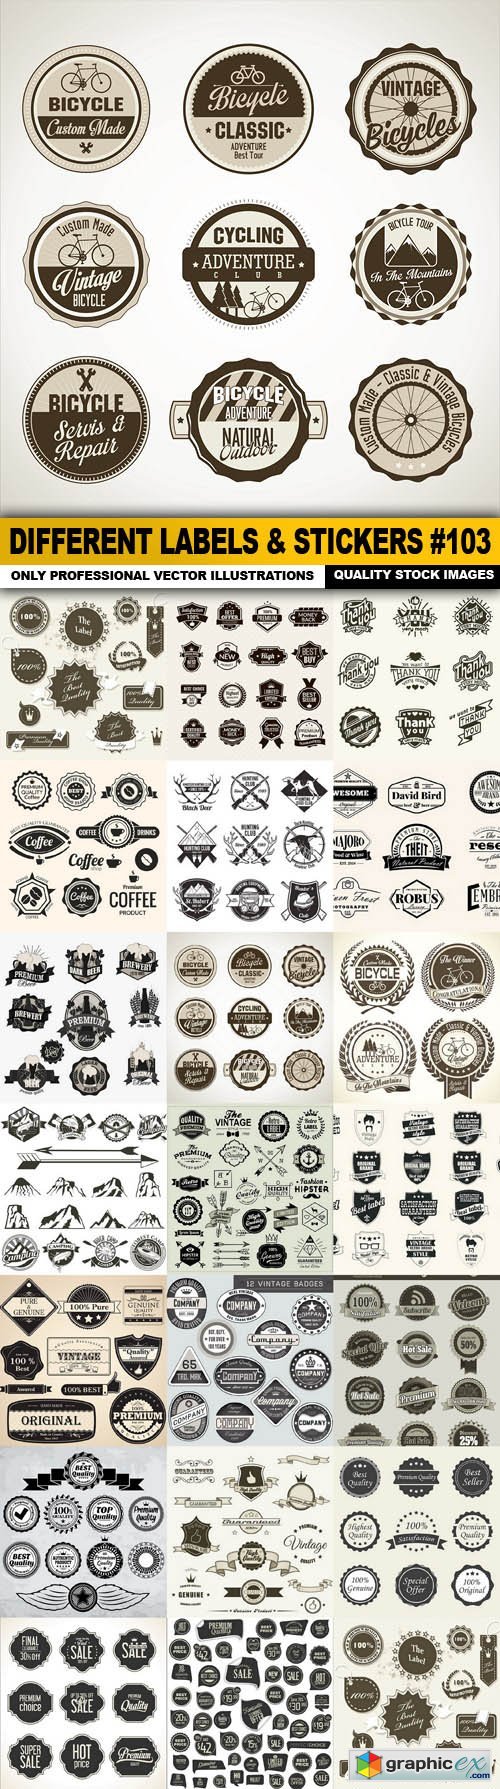 Different Labels & Stickers #103 - 20 Vector